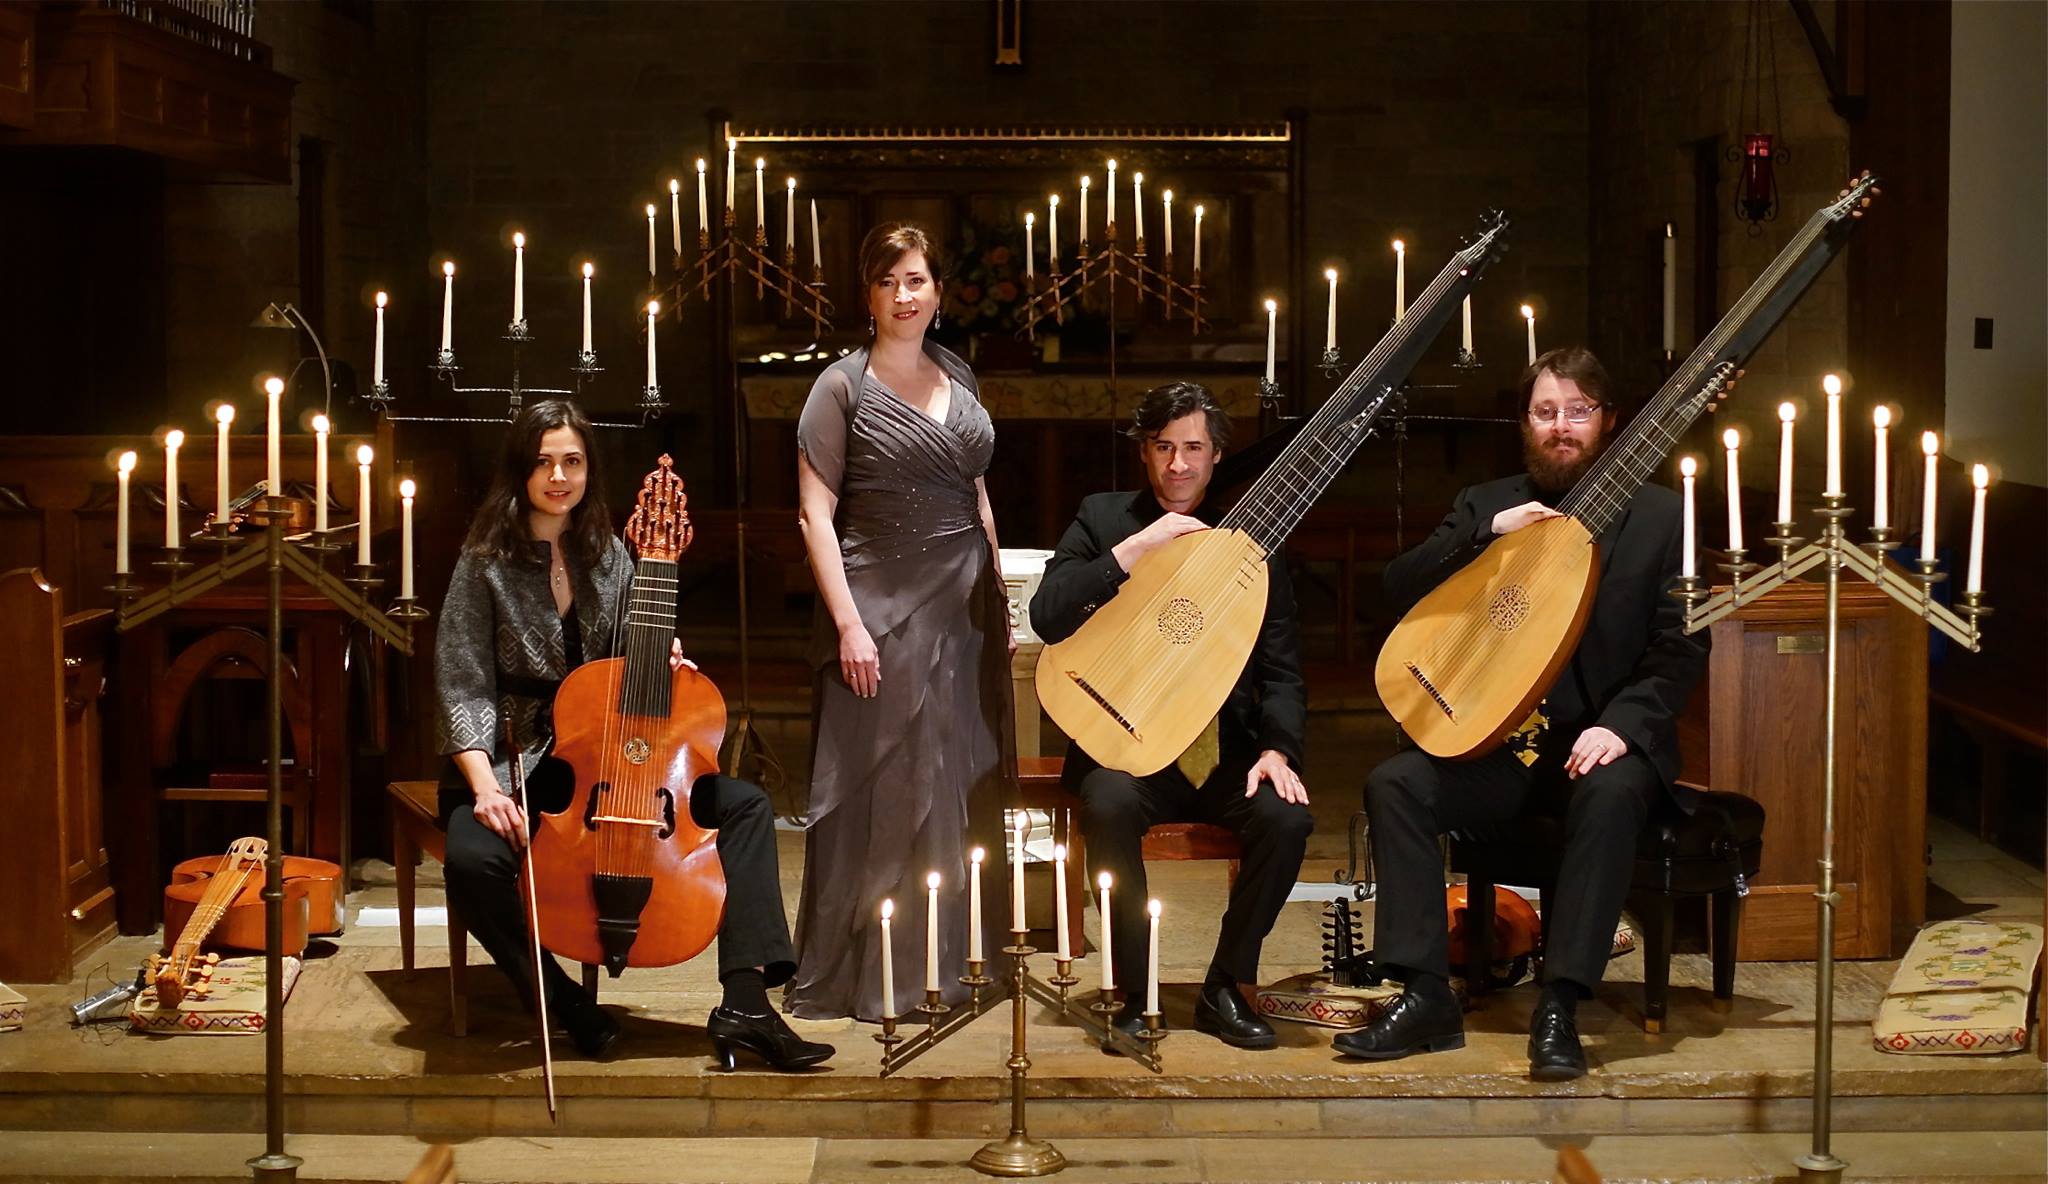 ensemble members on stage with candelabras in background